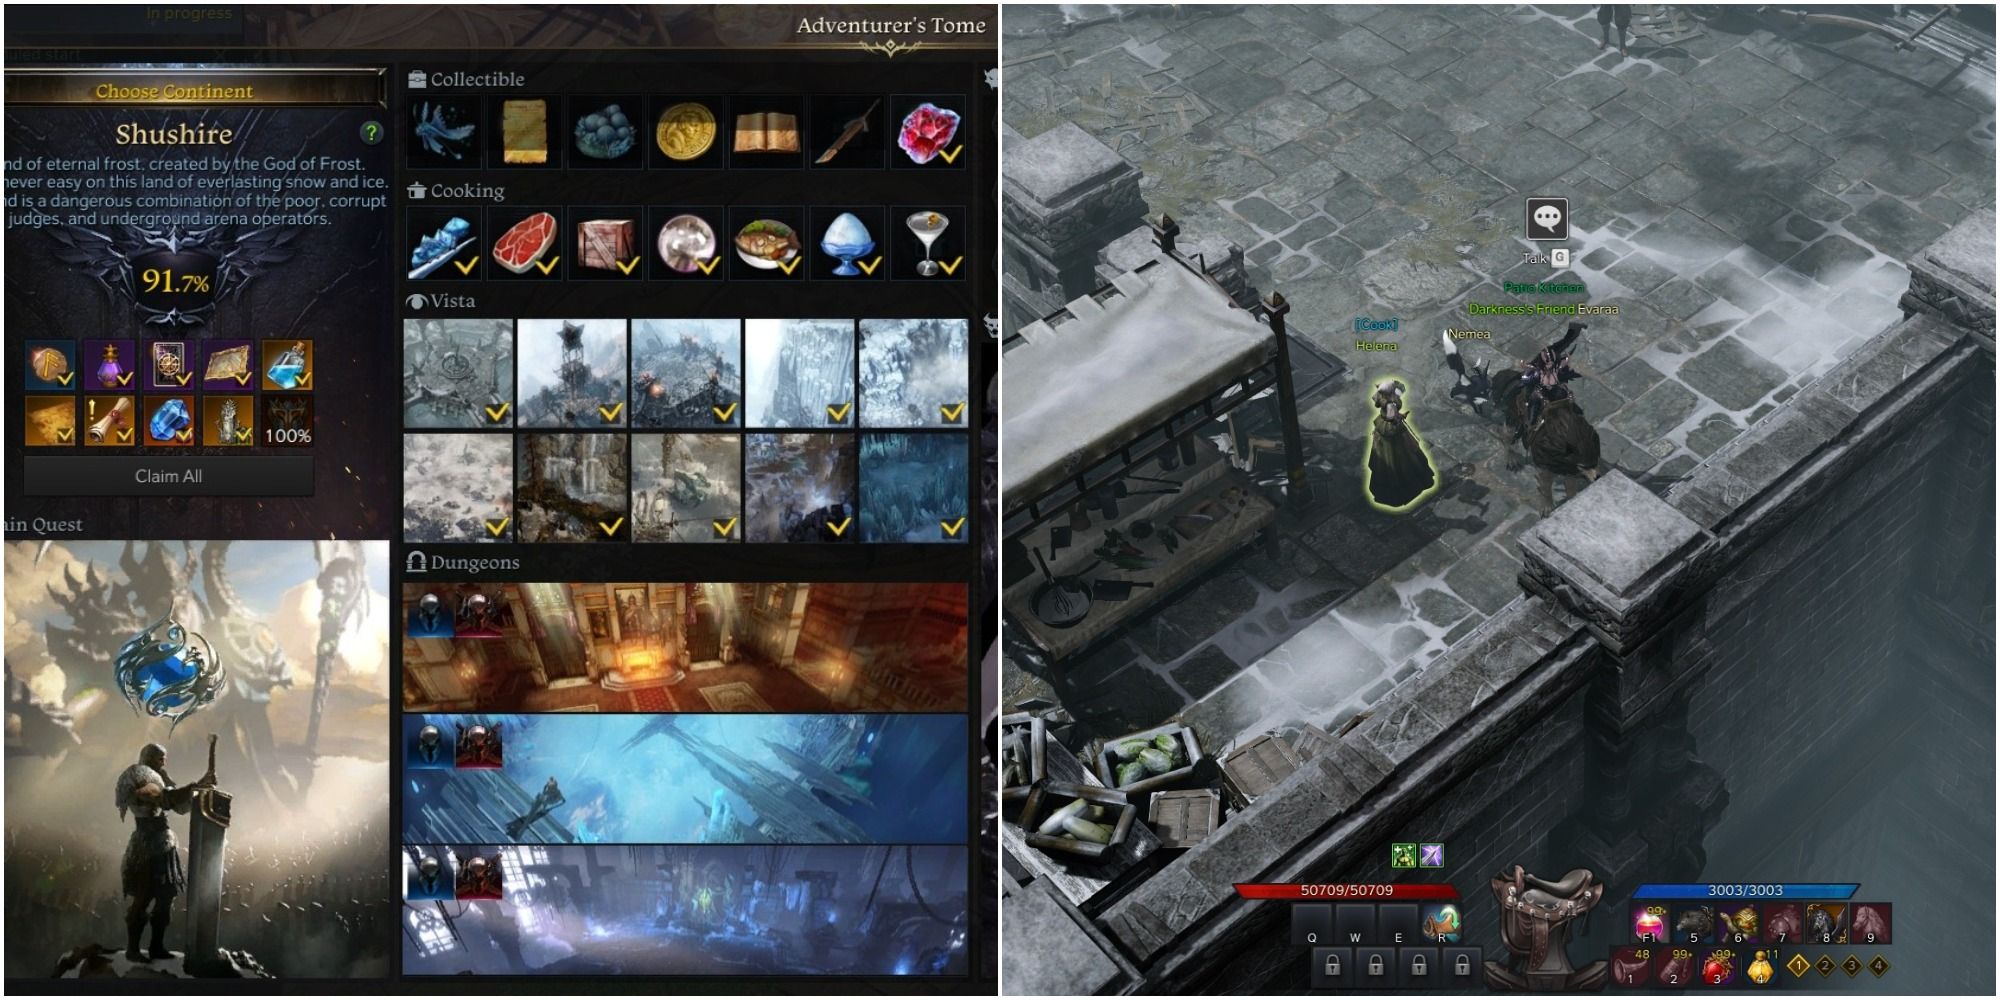 Lost Ark split image of Shushire's Adventurer's Tome and Cook Helena's location in Frozen Sea